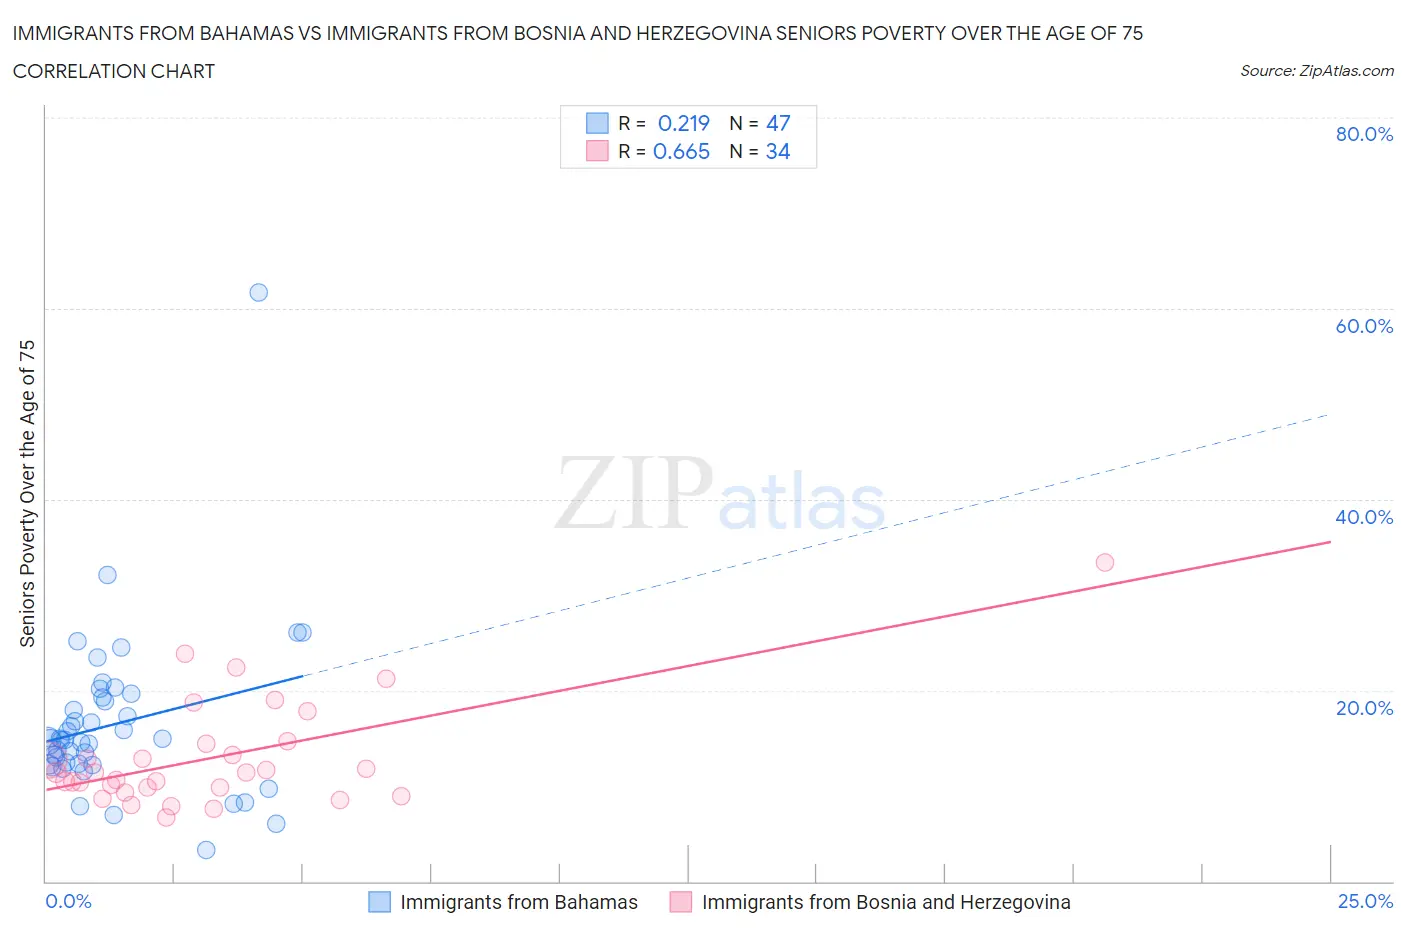 Immigrants from Bahamas vs Immigrants from Bosnia and Herzegovina Seniors Poverty Over the Age of 75